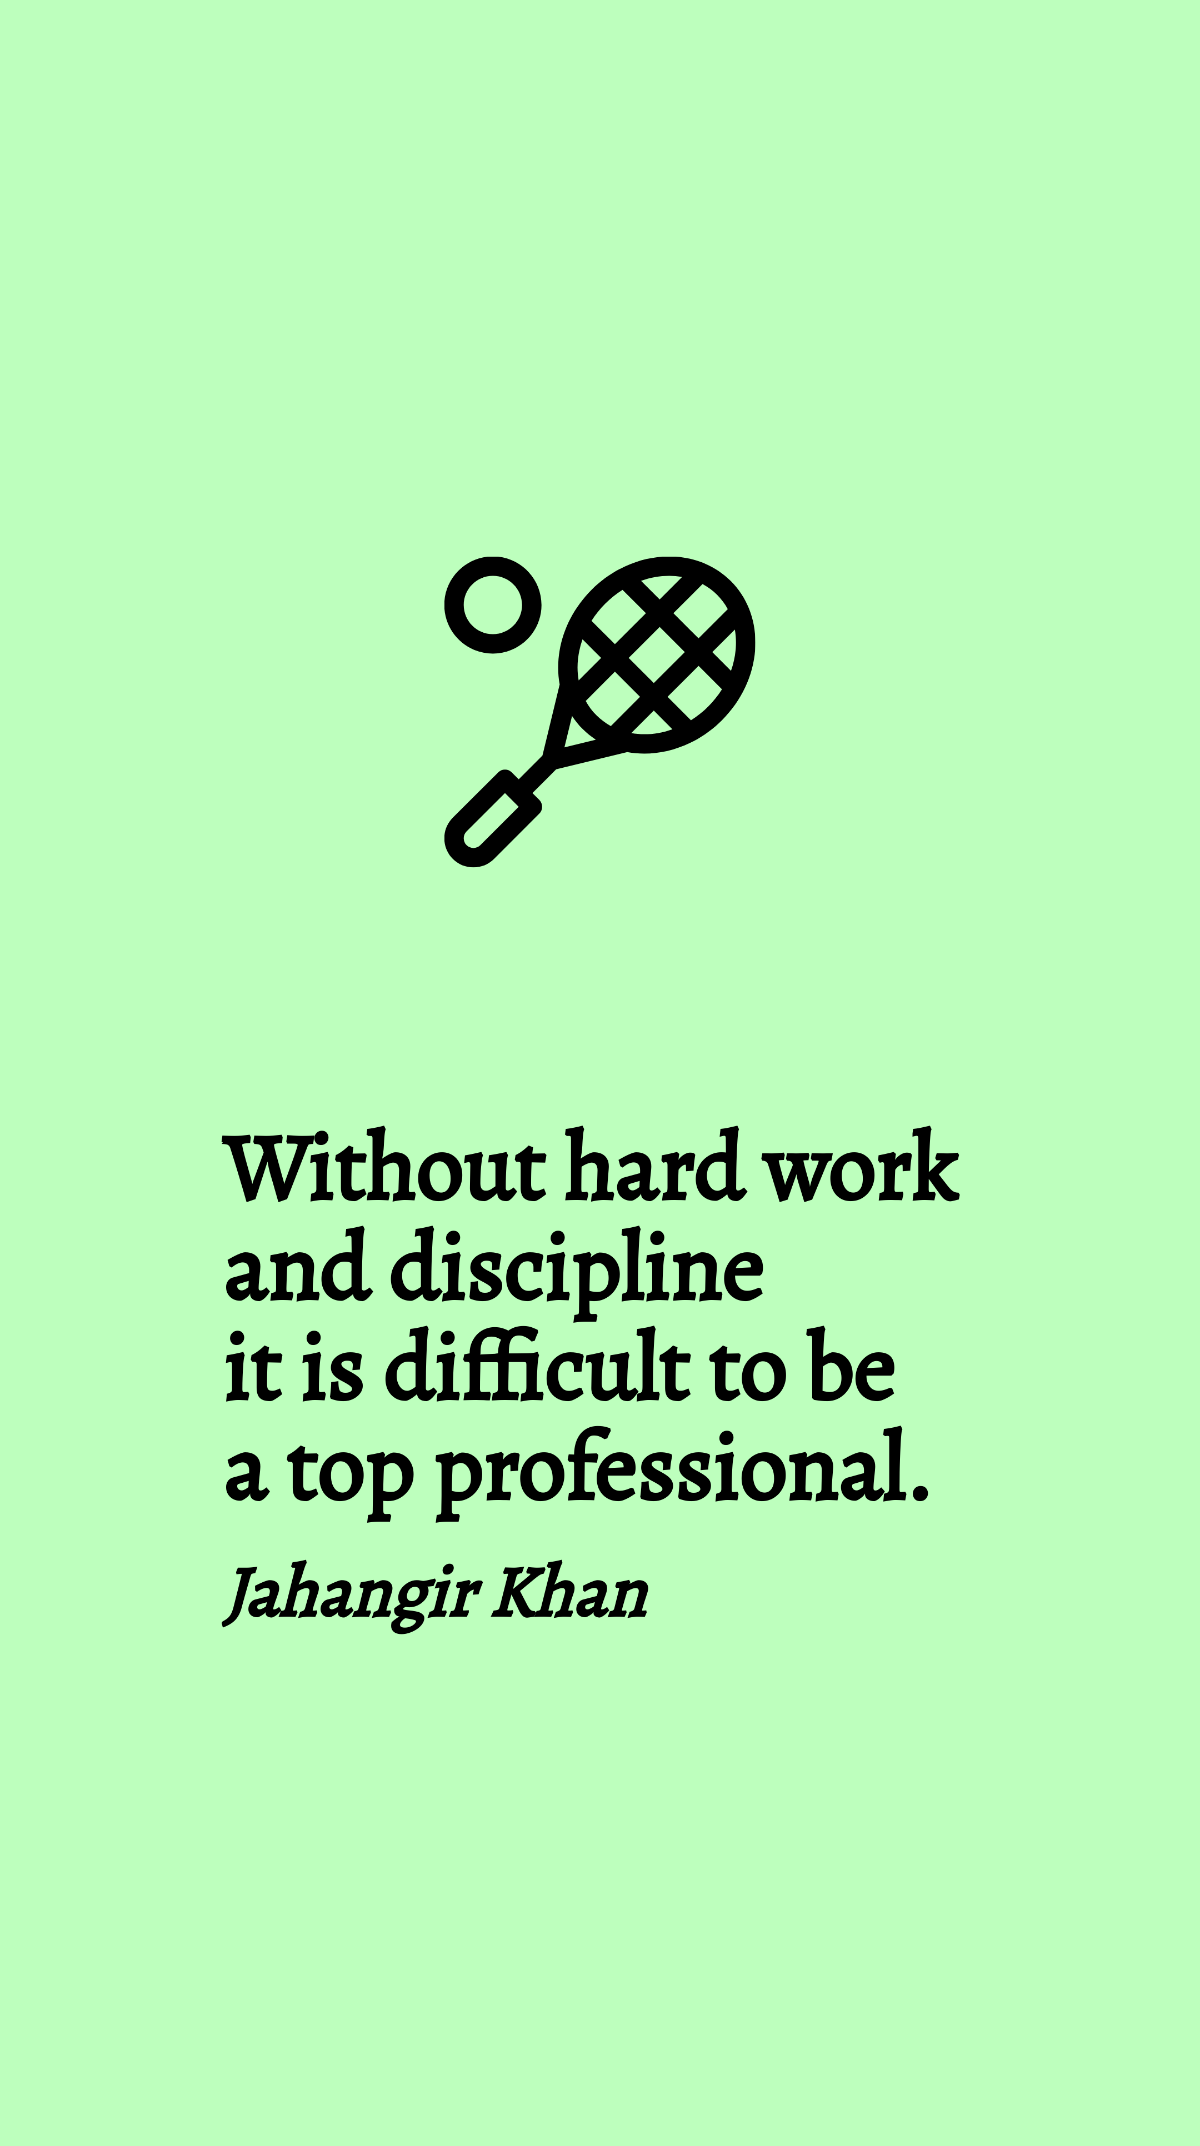 Jahangir Khan - Without hard work and discipline it is difficult to be a top professional. Template